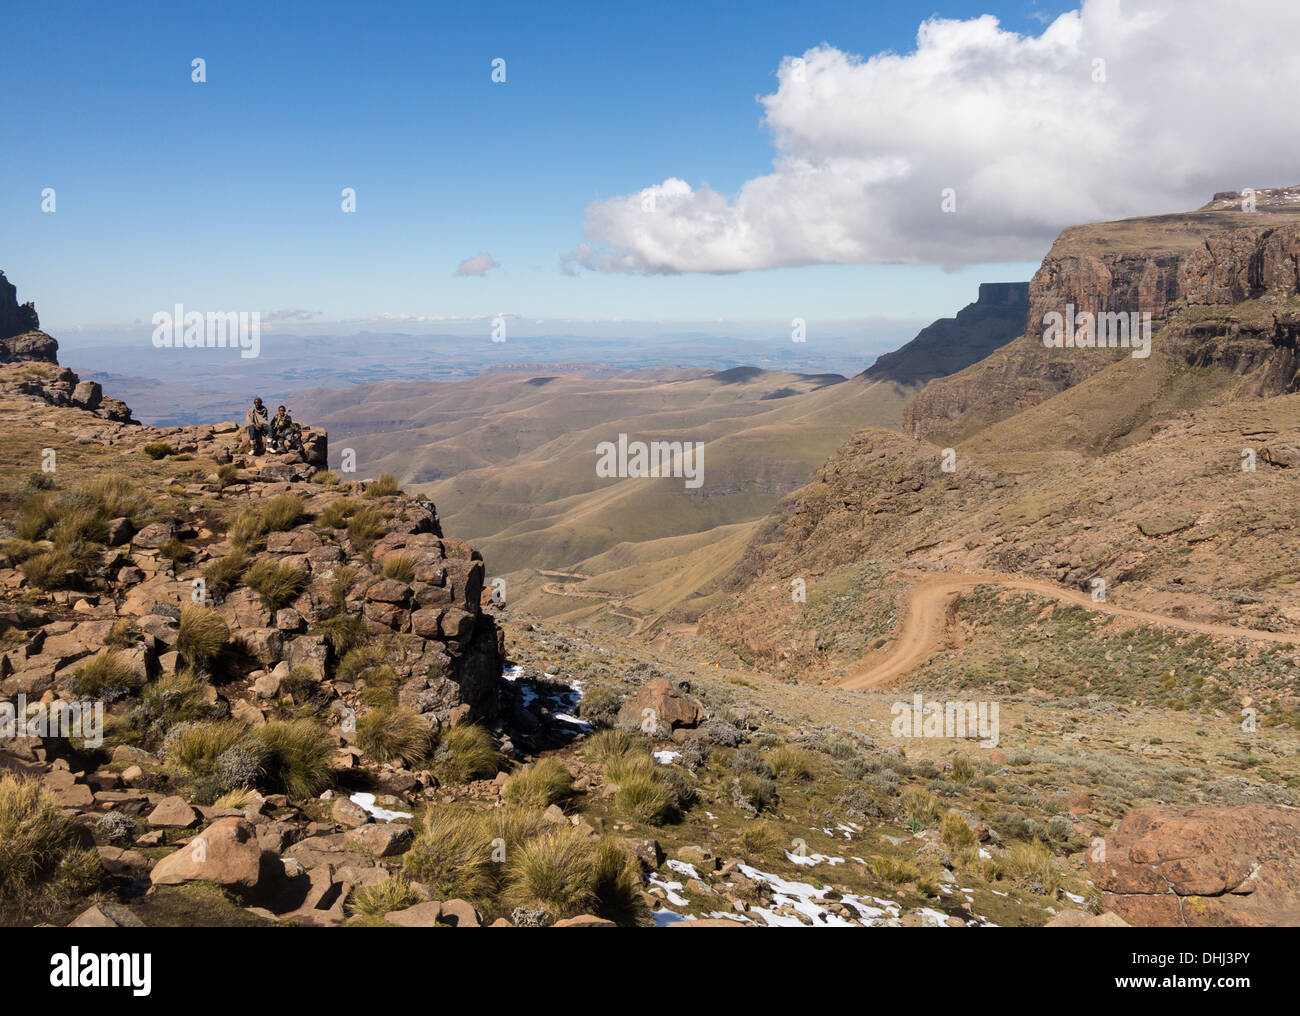 Africa landscape - Sani Pass Lesotho, South Africa.Two African boys sitting over the valley and winding road Stock Photo